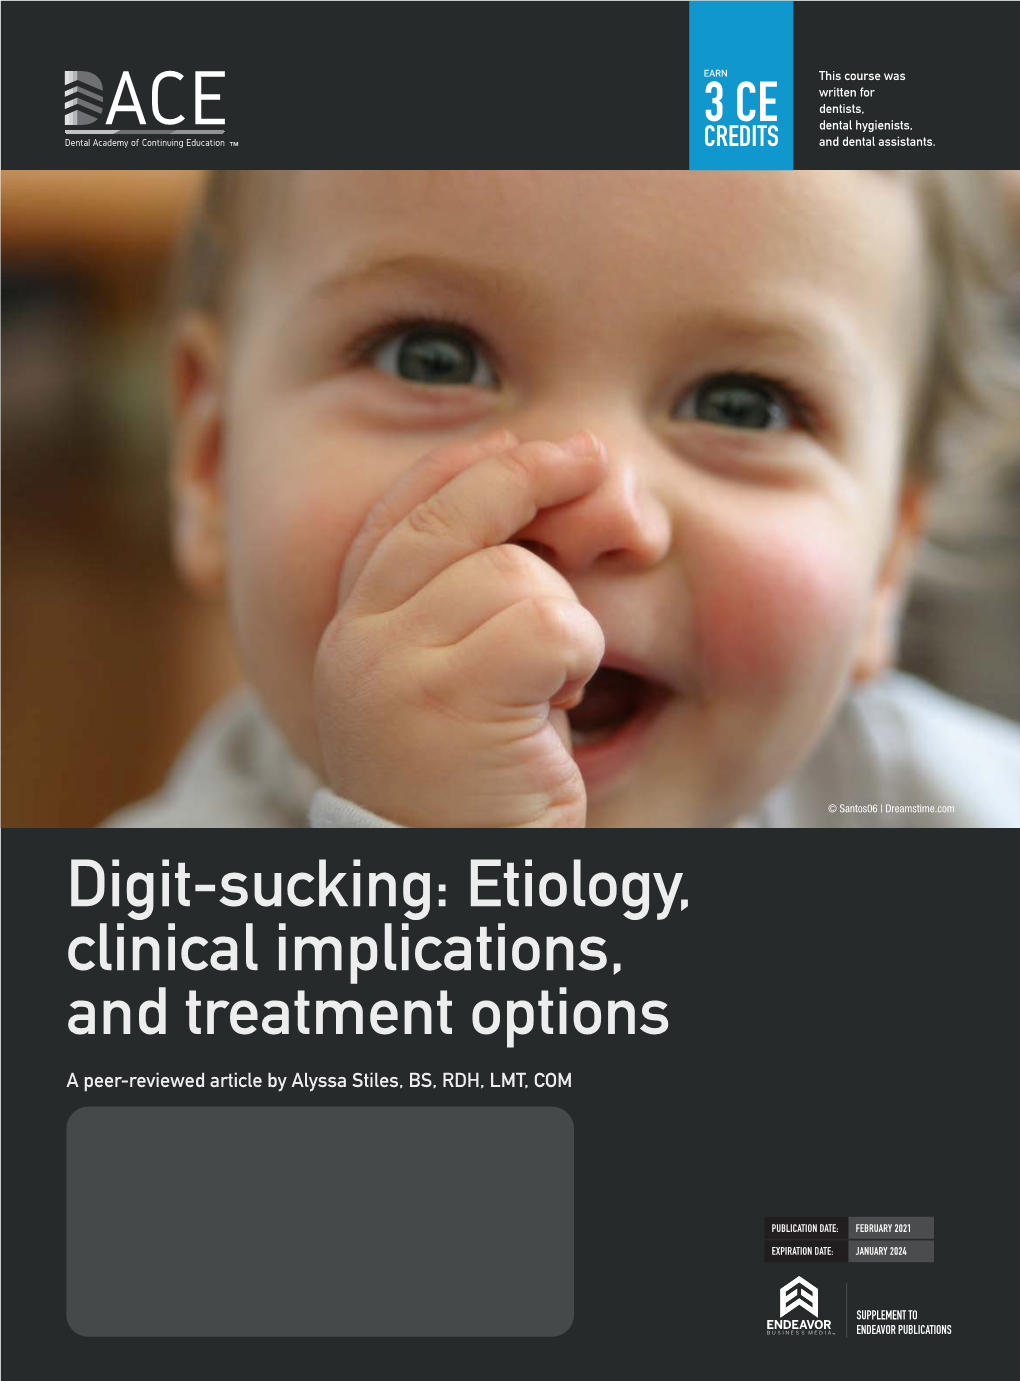 Digit-Sucking: Etiology, Clinical Implications, and Treatment Options